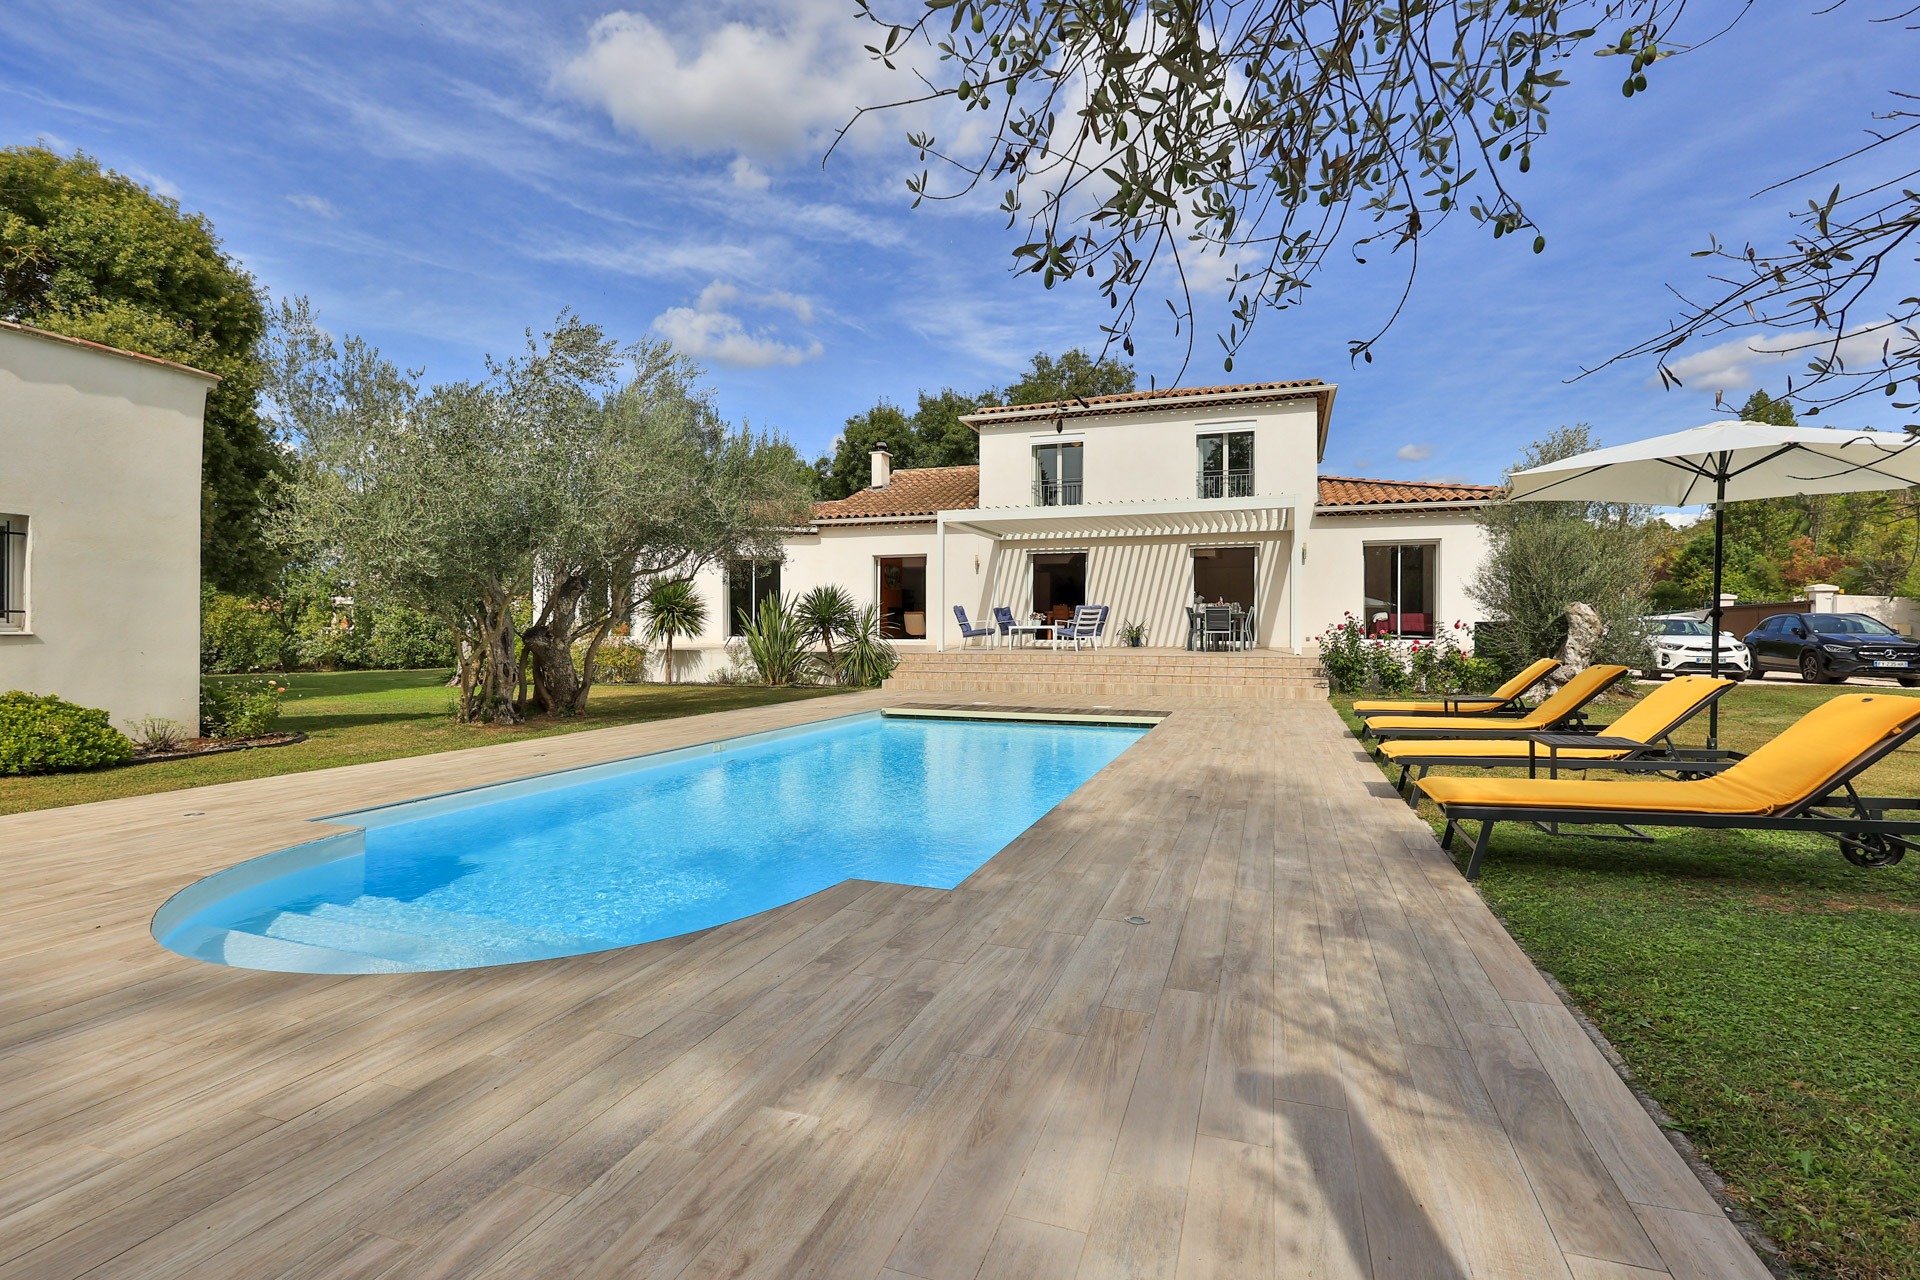 Best Place to Rent a Villa in France